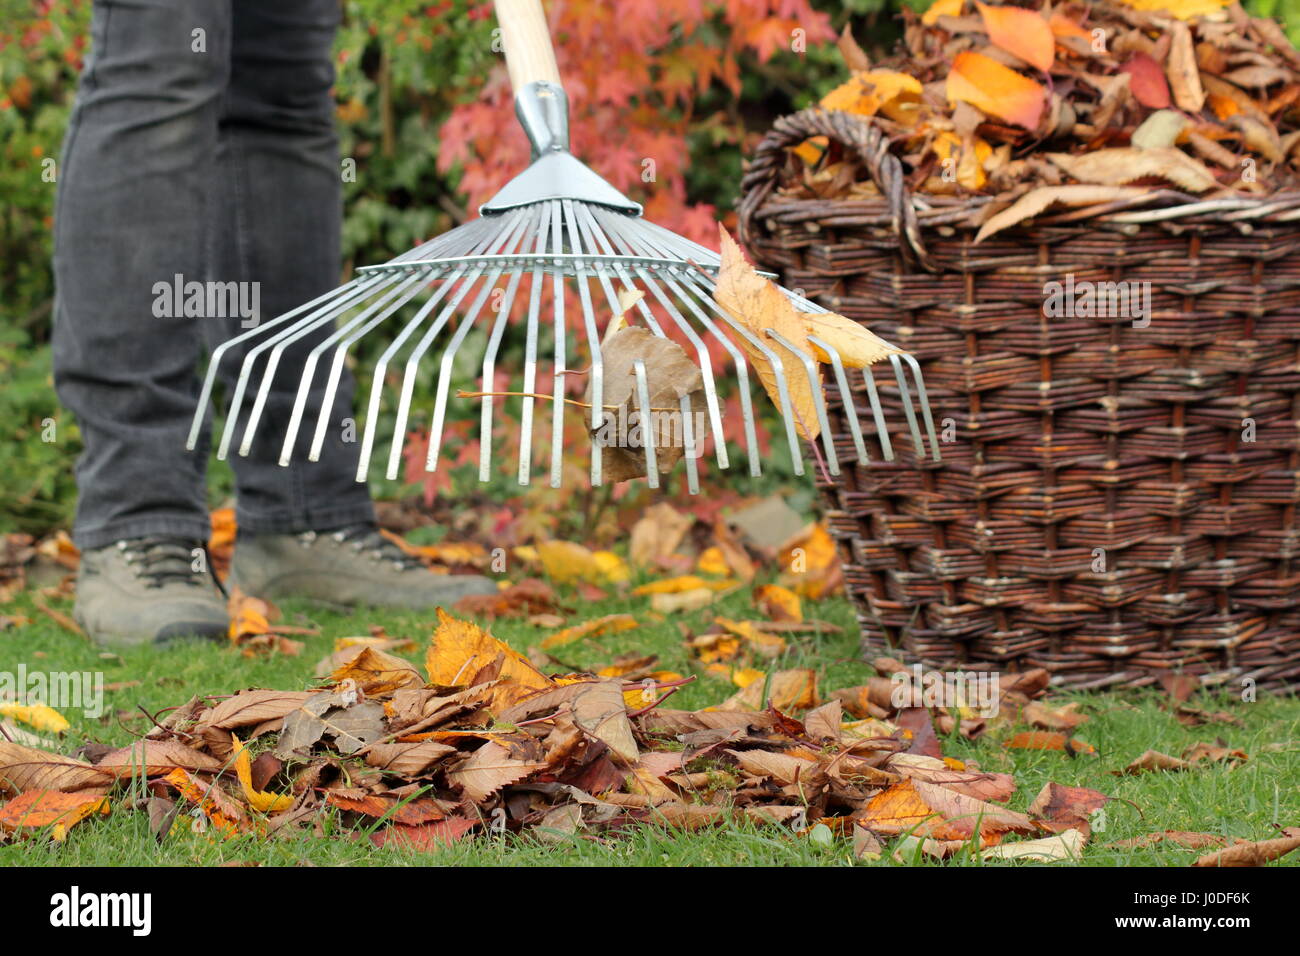 A female gardener rakes up fallen cherry tree leaves (prunus) into a woven basket from a garden lawn as part of autumn lawn maintenance tasks -October Stock Photo